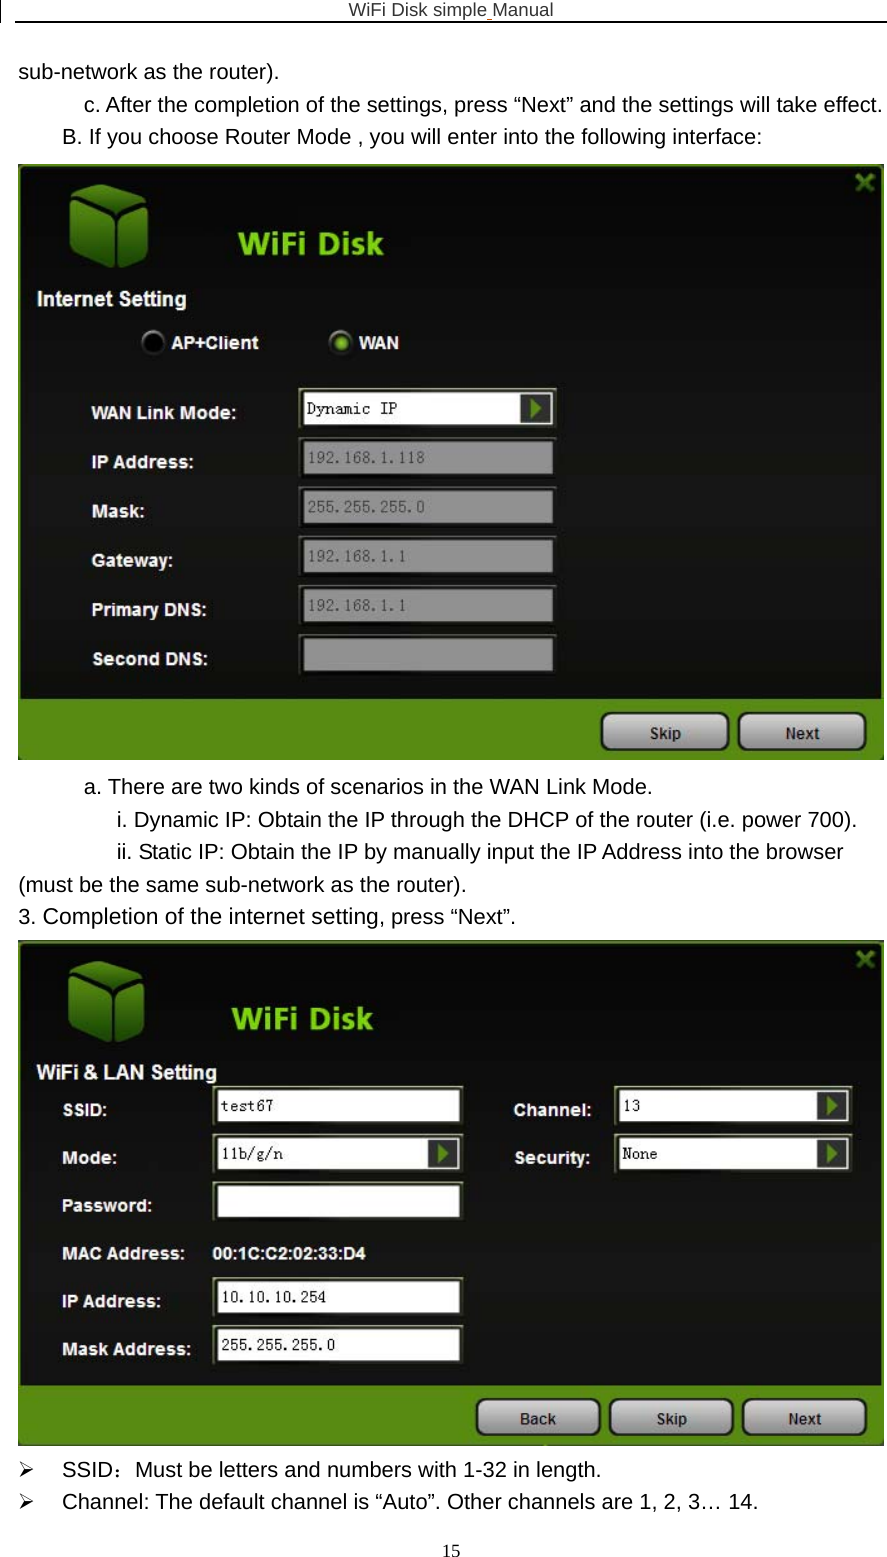 WiFi Disk simple Manual  15sub-network as the router).   c. After the completion of the settings, press “Next” and the settings will take effect. B. If you choose Router Mode , you will enter into the following interface:  a. There are two kinds of scenarios in the WAN Link Mode. i. Dynamic IP: Obtain the IP through the DHCP of the router (i.e. power 700). ii. Static IP: Obtain the IP by manually input the IP Address into the browser (must be the same sub-network as the router). 3. Completion of the internet setting, press “Next”.  ¾ SSID：Must be letters and numbers with 1-32 in length. ¾  Channel: The default channel is “Auto”. Other channels are 1, 2, 3… 14. 